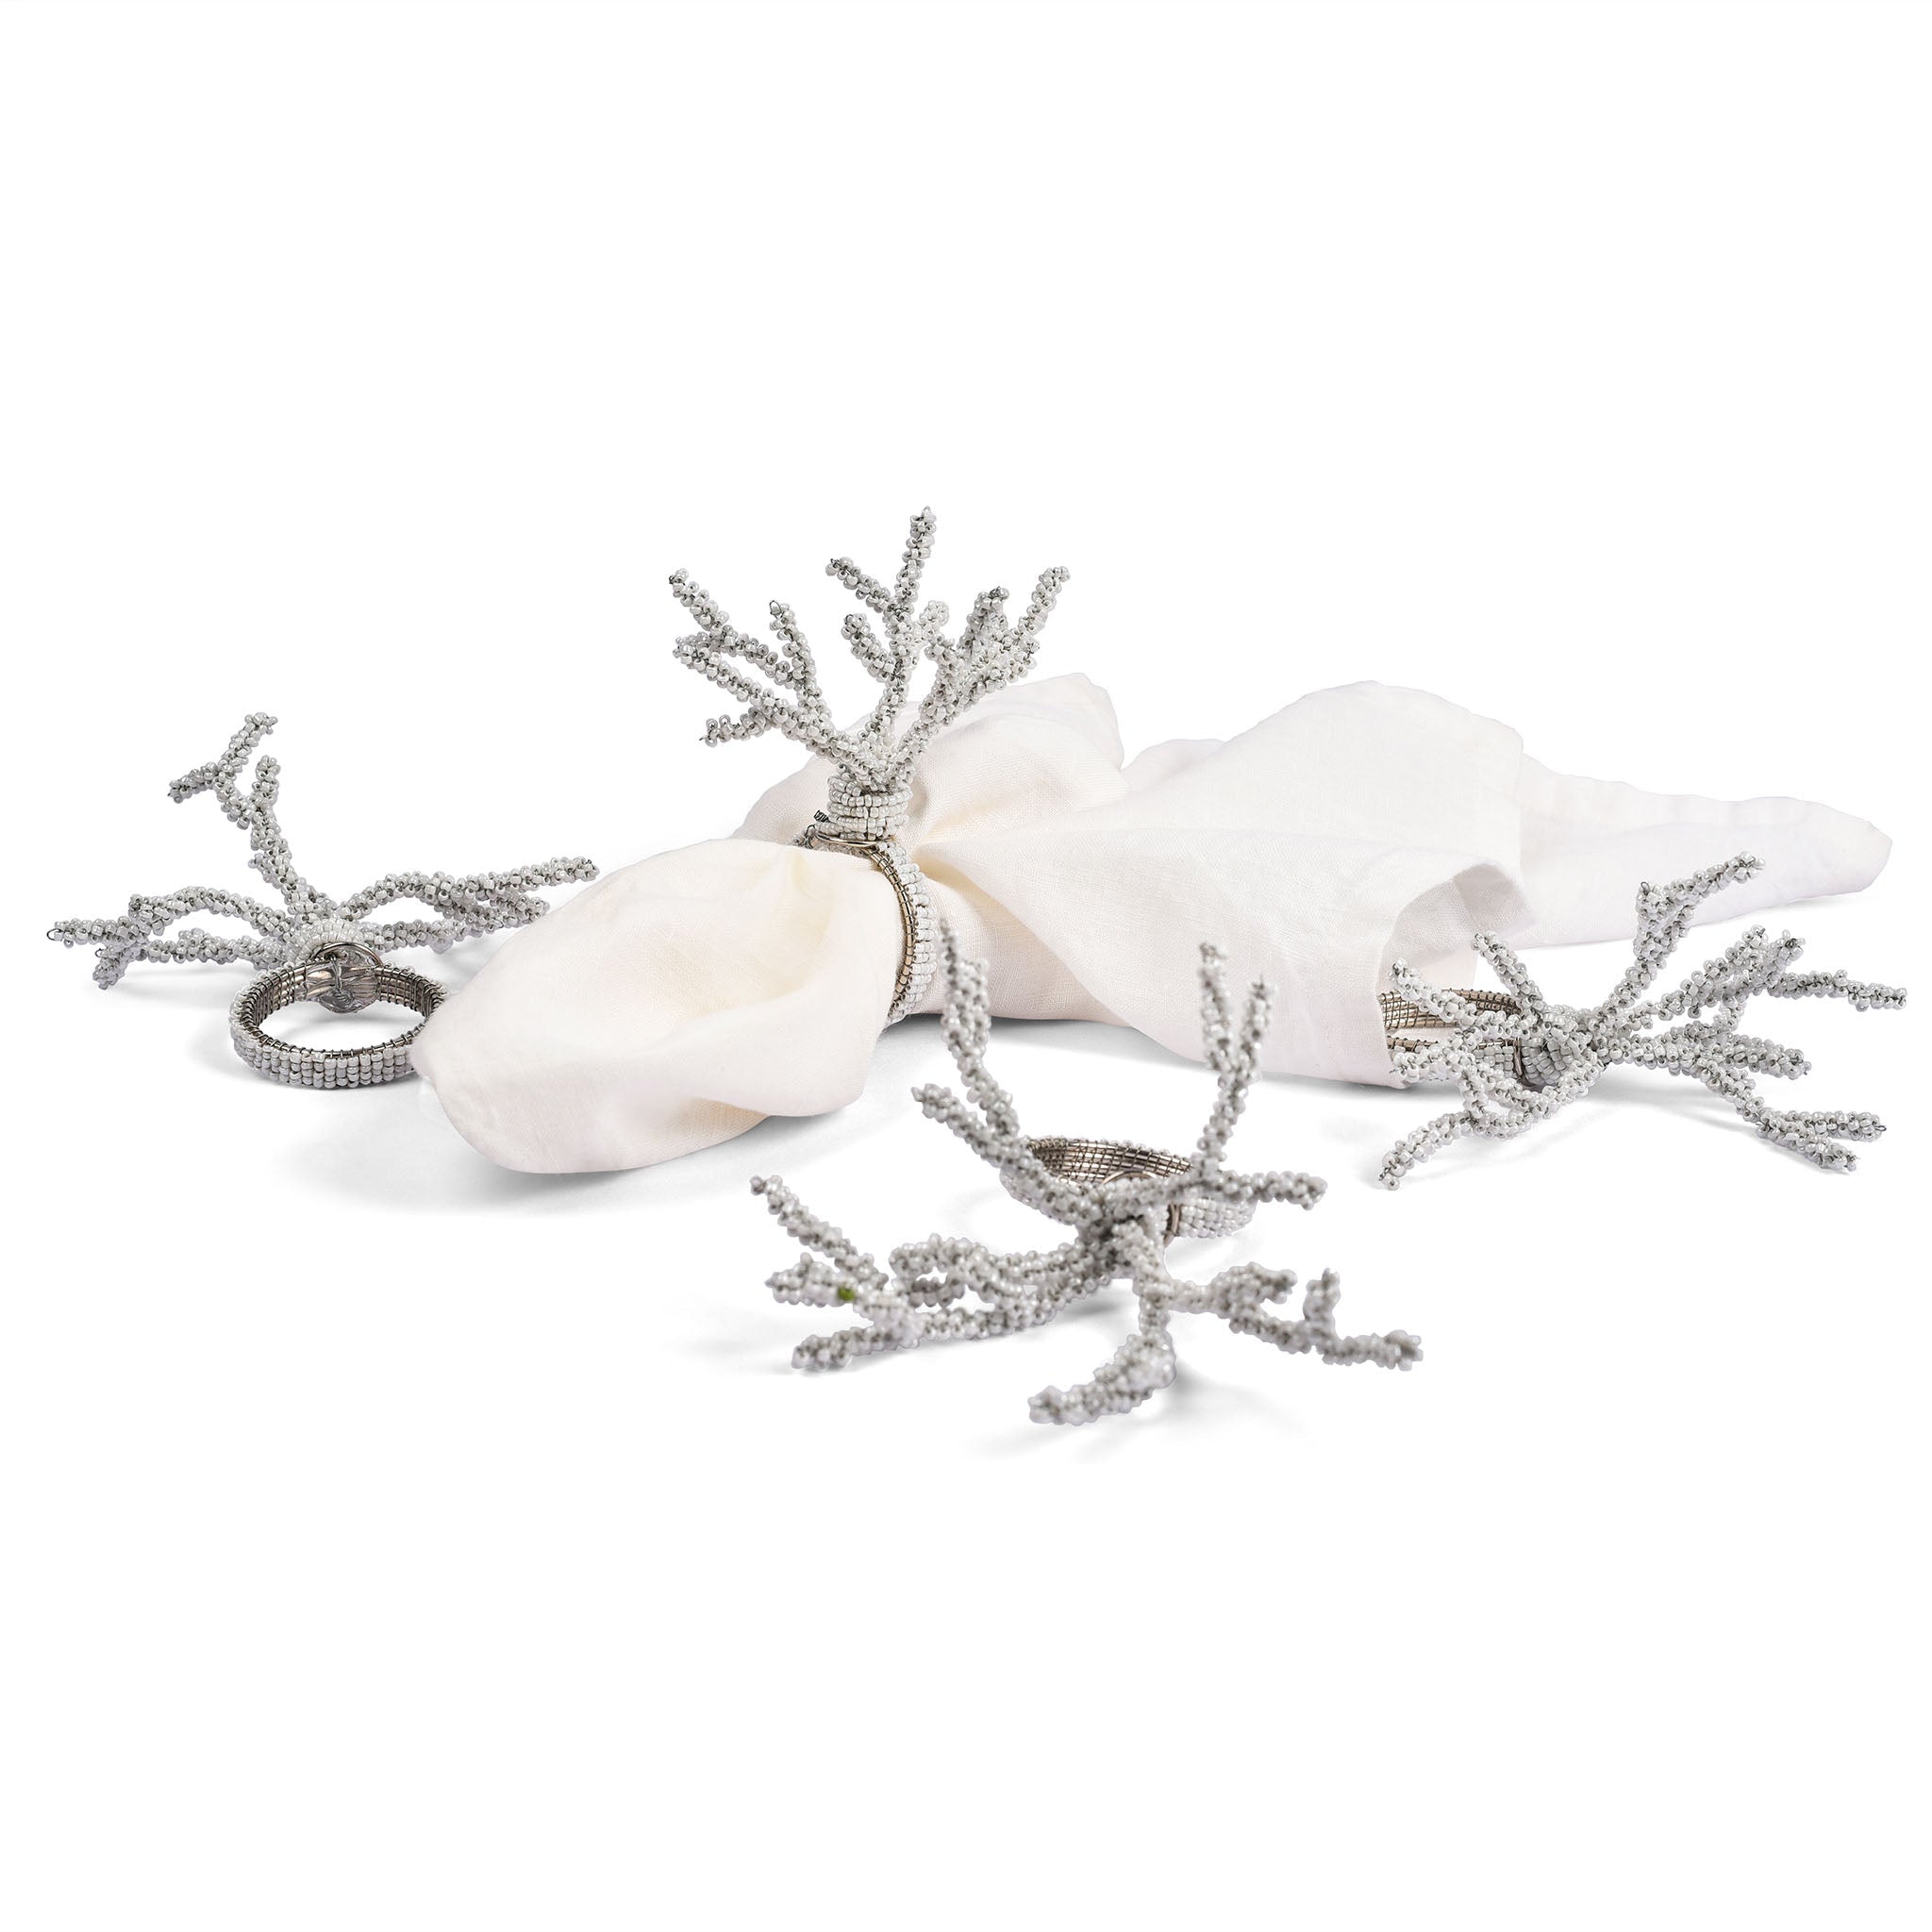 Reef Madness Napkin Ring in Luster White, Set of 4